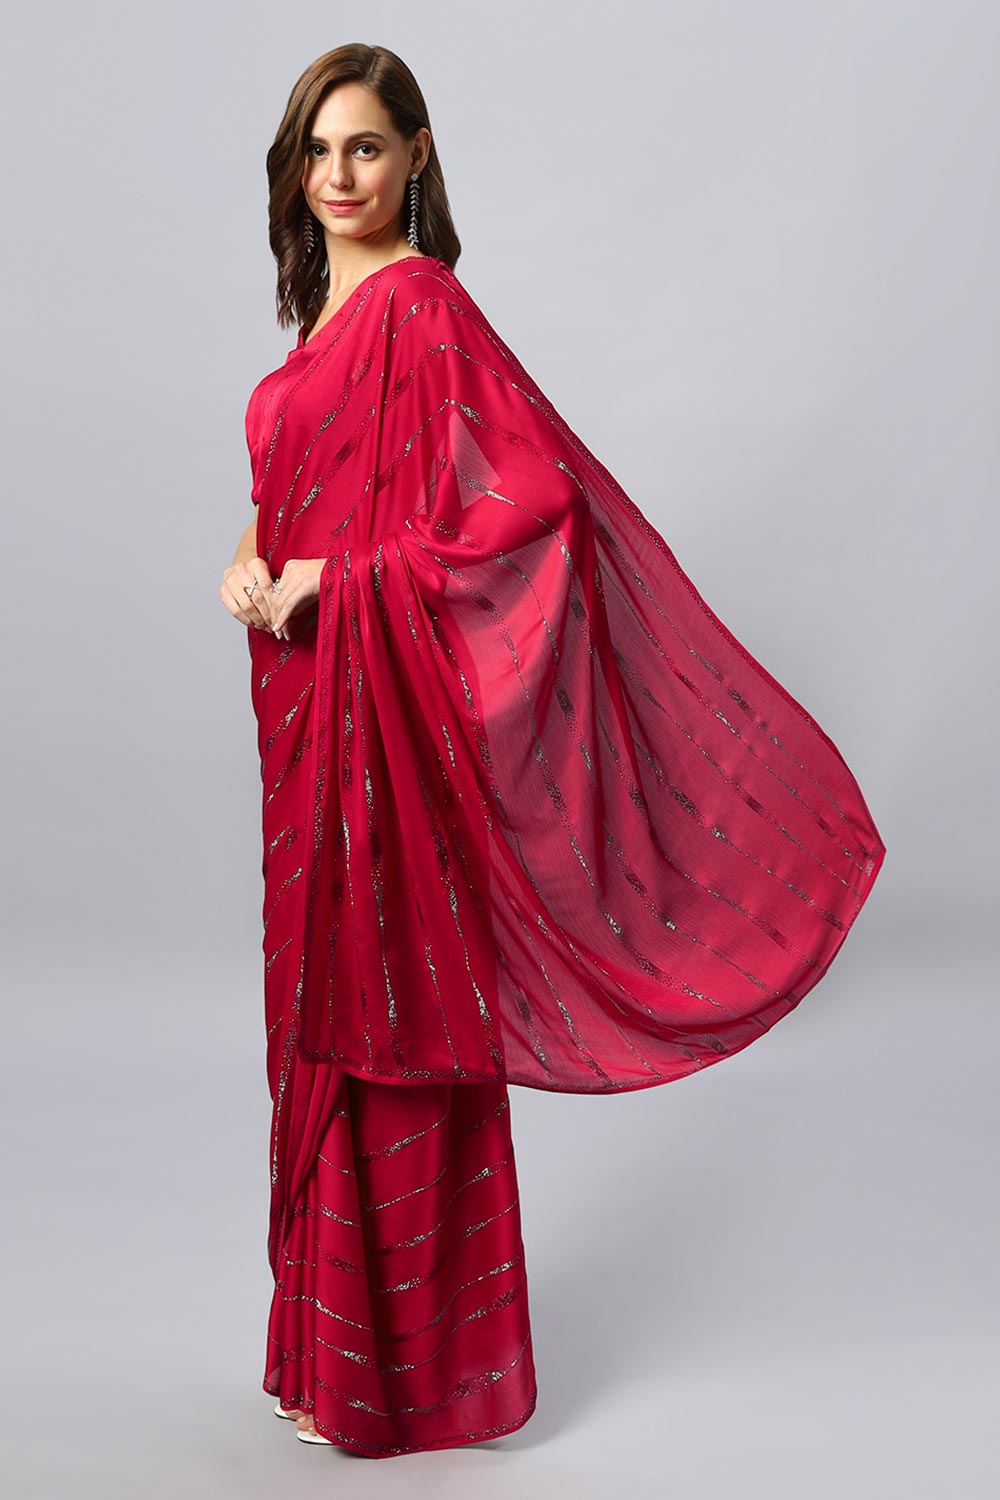 Shop Alice Luxe Red Swarovski Satin Silk One Minute Saree at best offer at our  Store - One Minute Saree